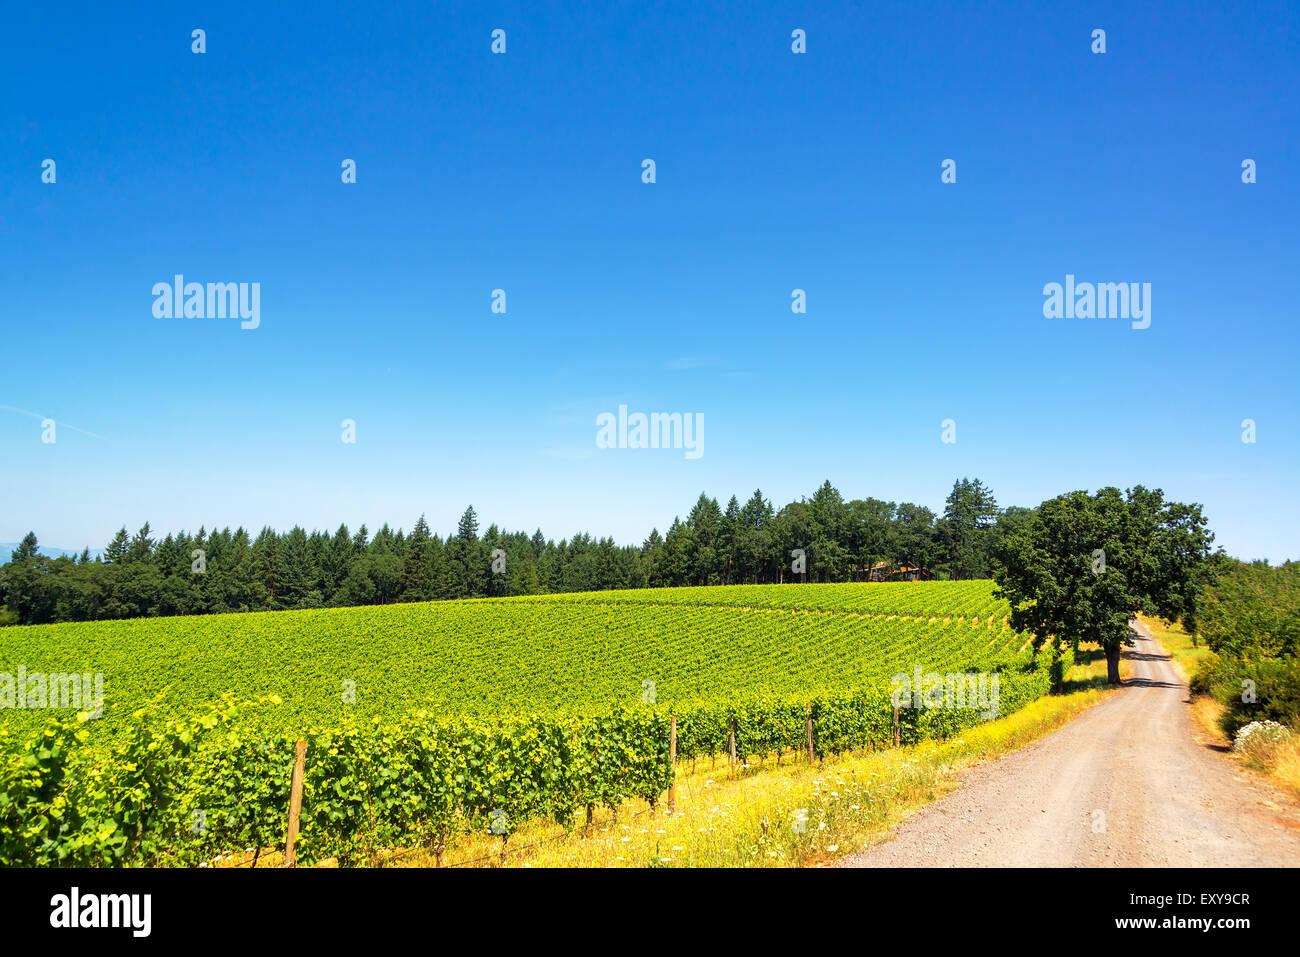 Dirt road passing through a vineyard in Oregon wine country Stock Photo